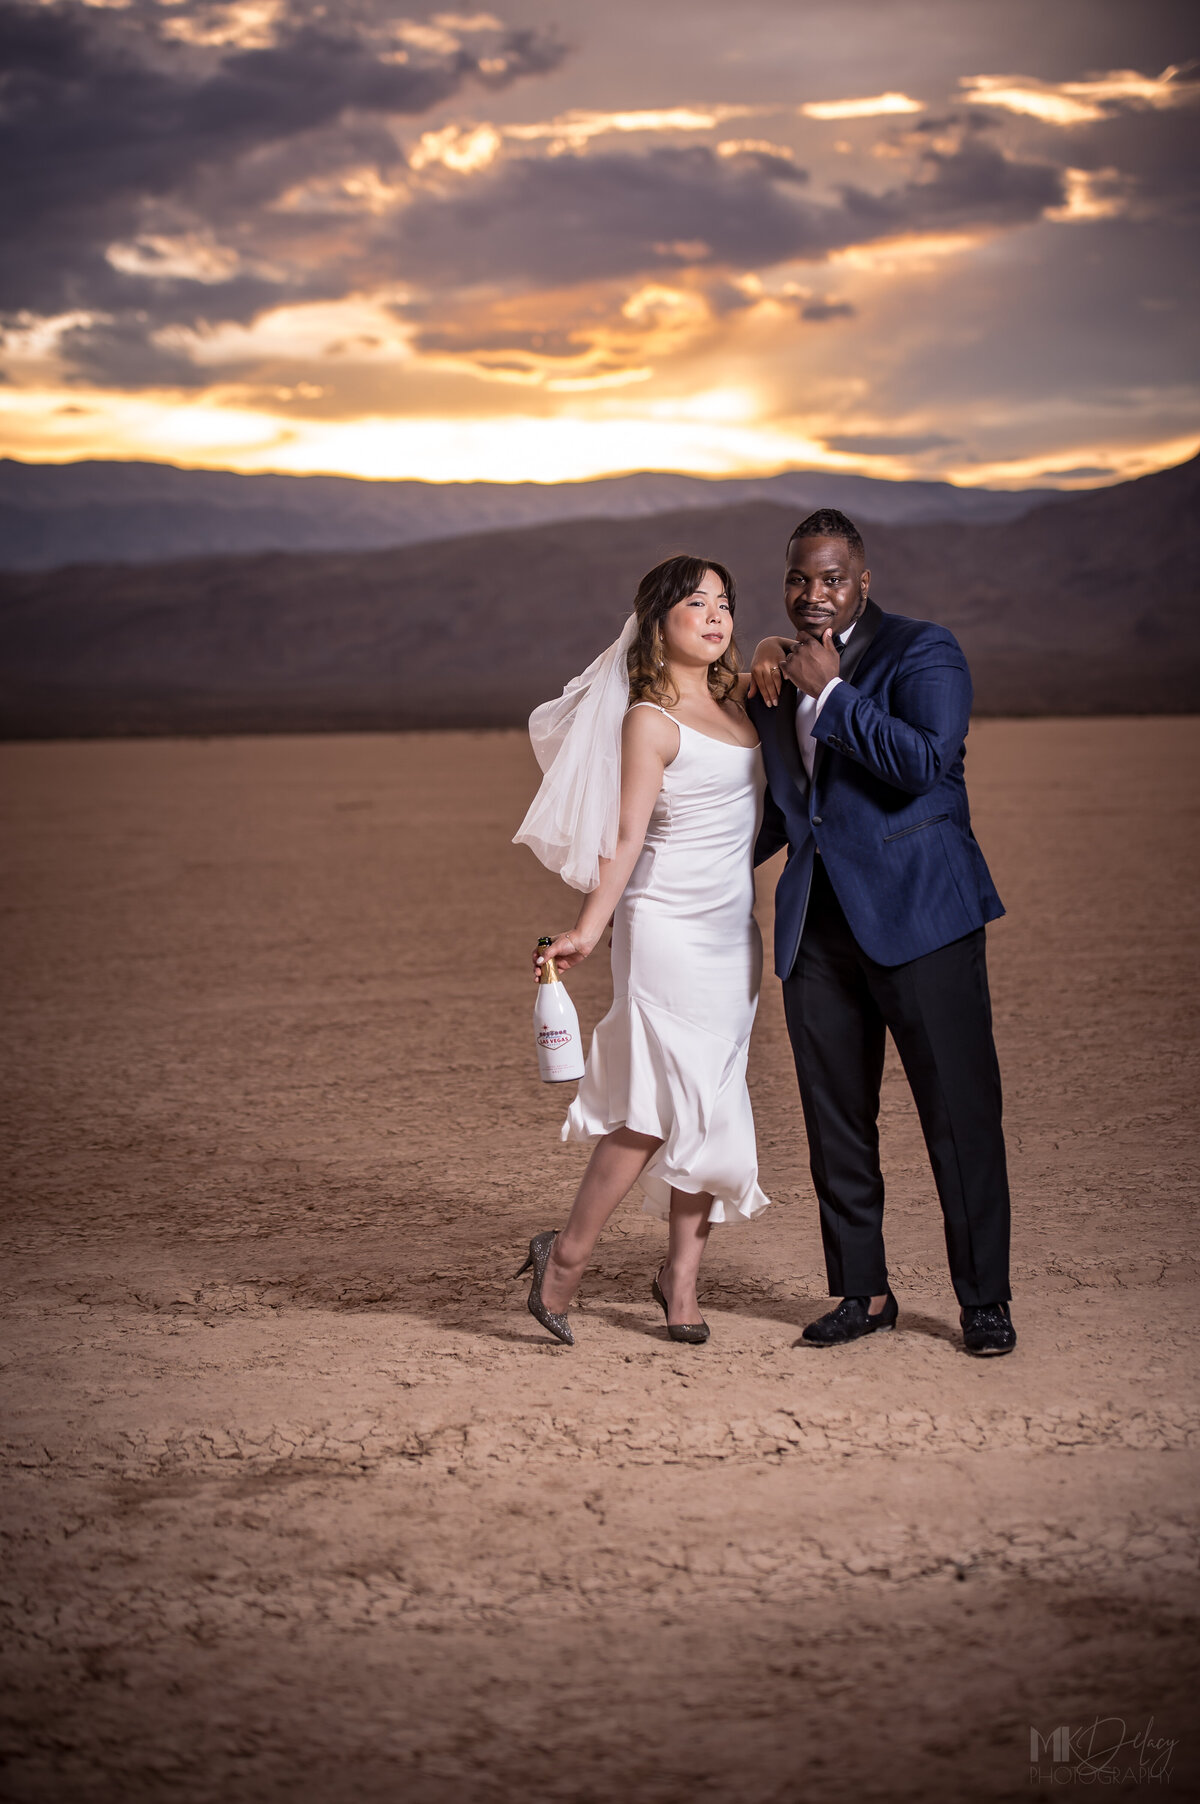 Bride and groom strike a pose in theri dry lake bed elopement portraits as bride holds iconic welcome to las vegas champagne bottle the sun sets over the top of the mountains behind them turning the mountains purple and the clouds from rain las vegas elopement on the dry lake bed  at golden hour groom in blue suit jacket and black  pants  las vegas elopement eloping in vegas  las vegas wedding photographers las vegas wedding photography mk delacy photography